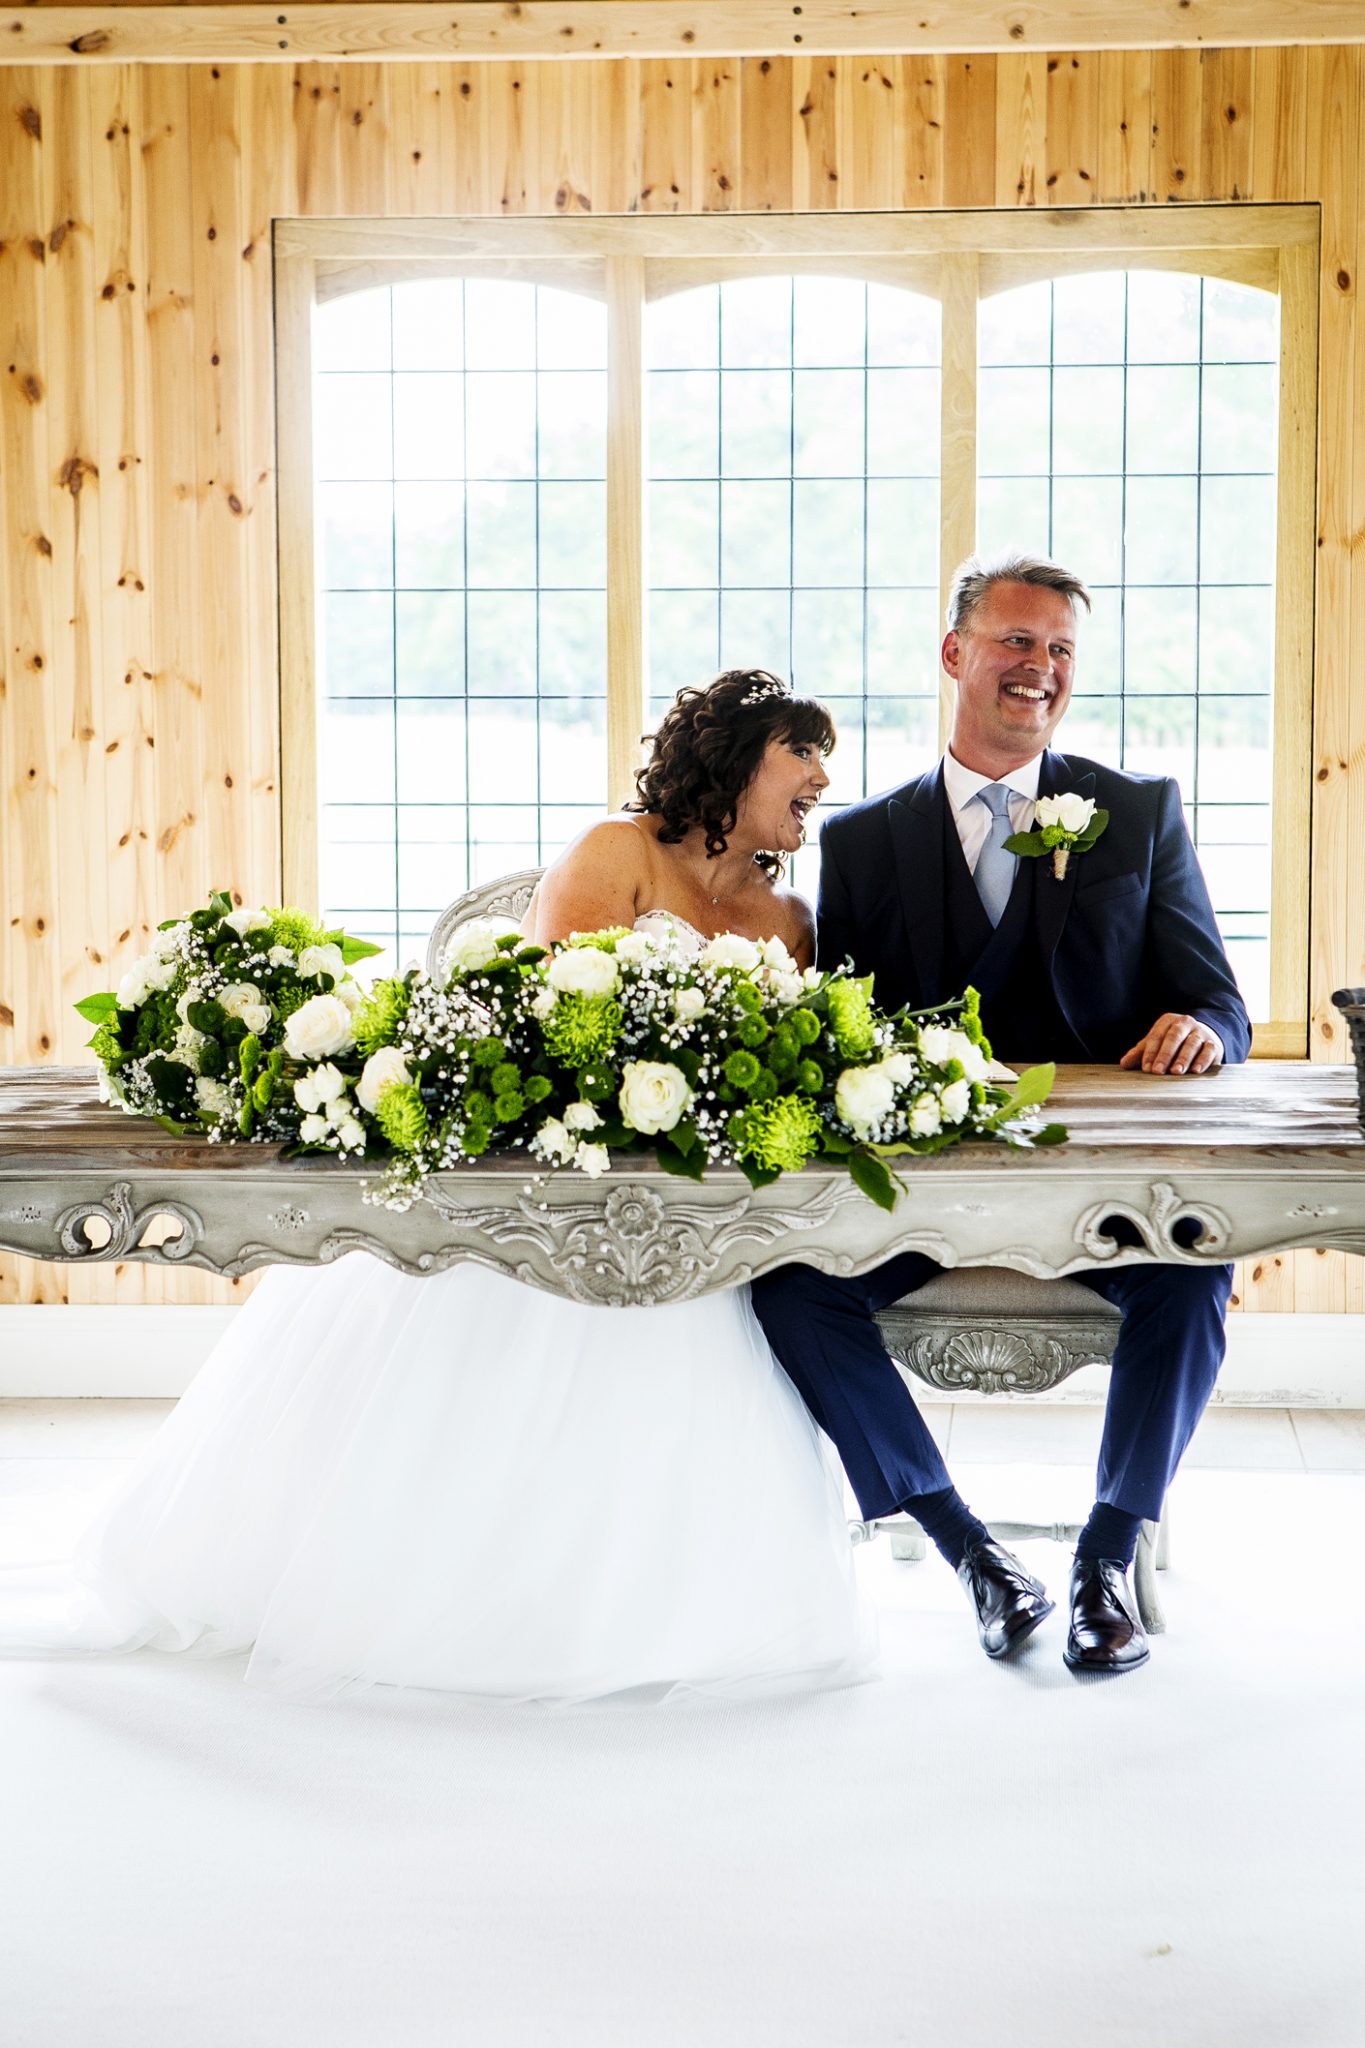 the bride-and-groom-at-the-wedding-venue-merrydale-manor-knutsford-cheshire